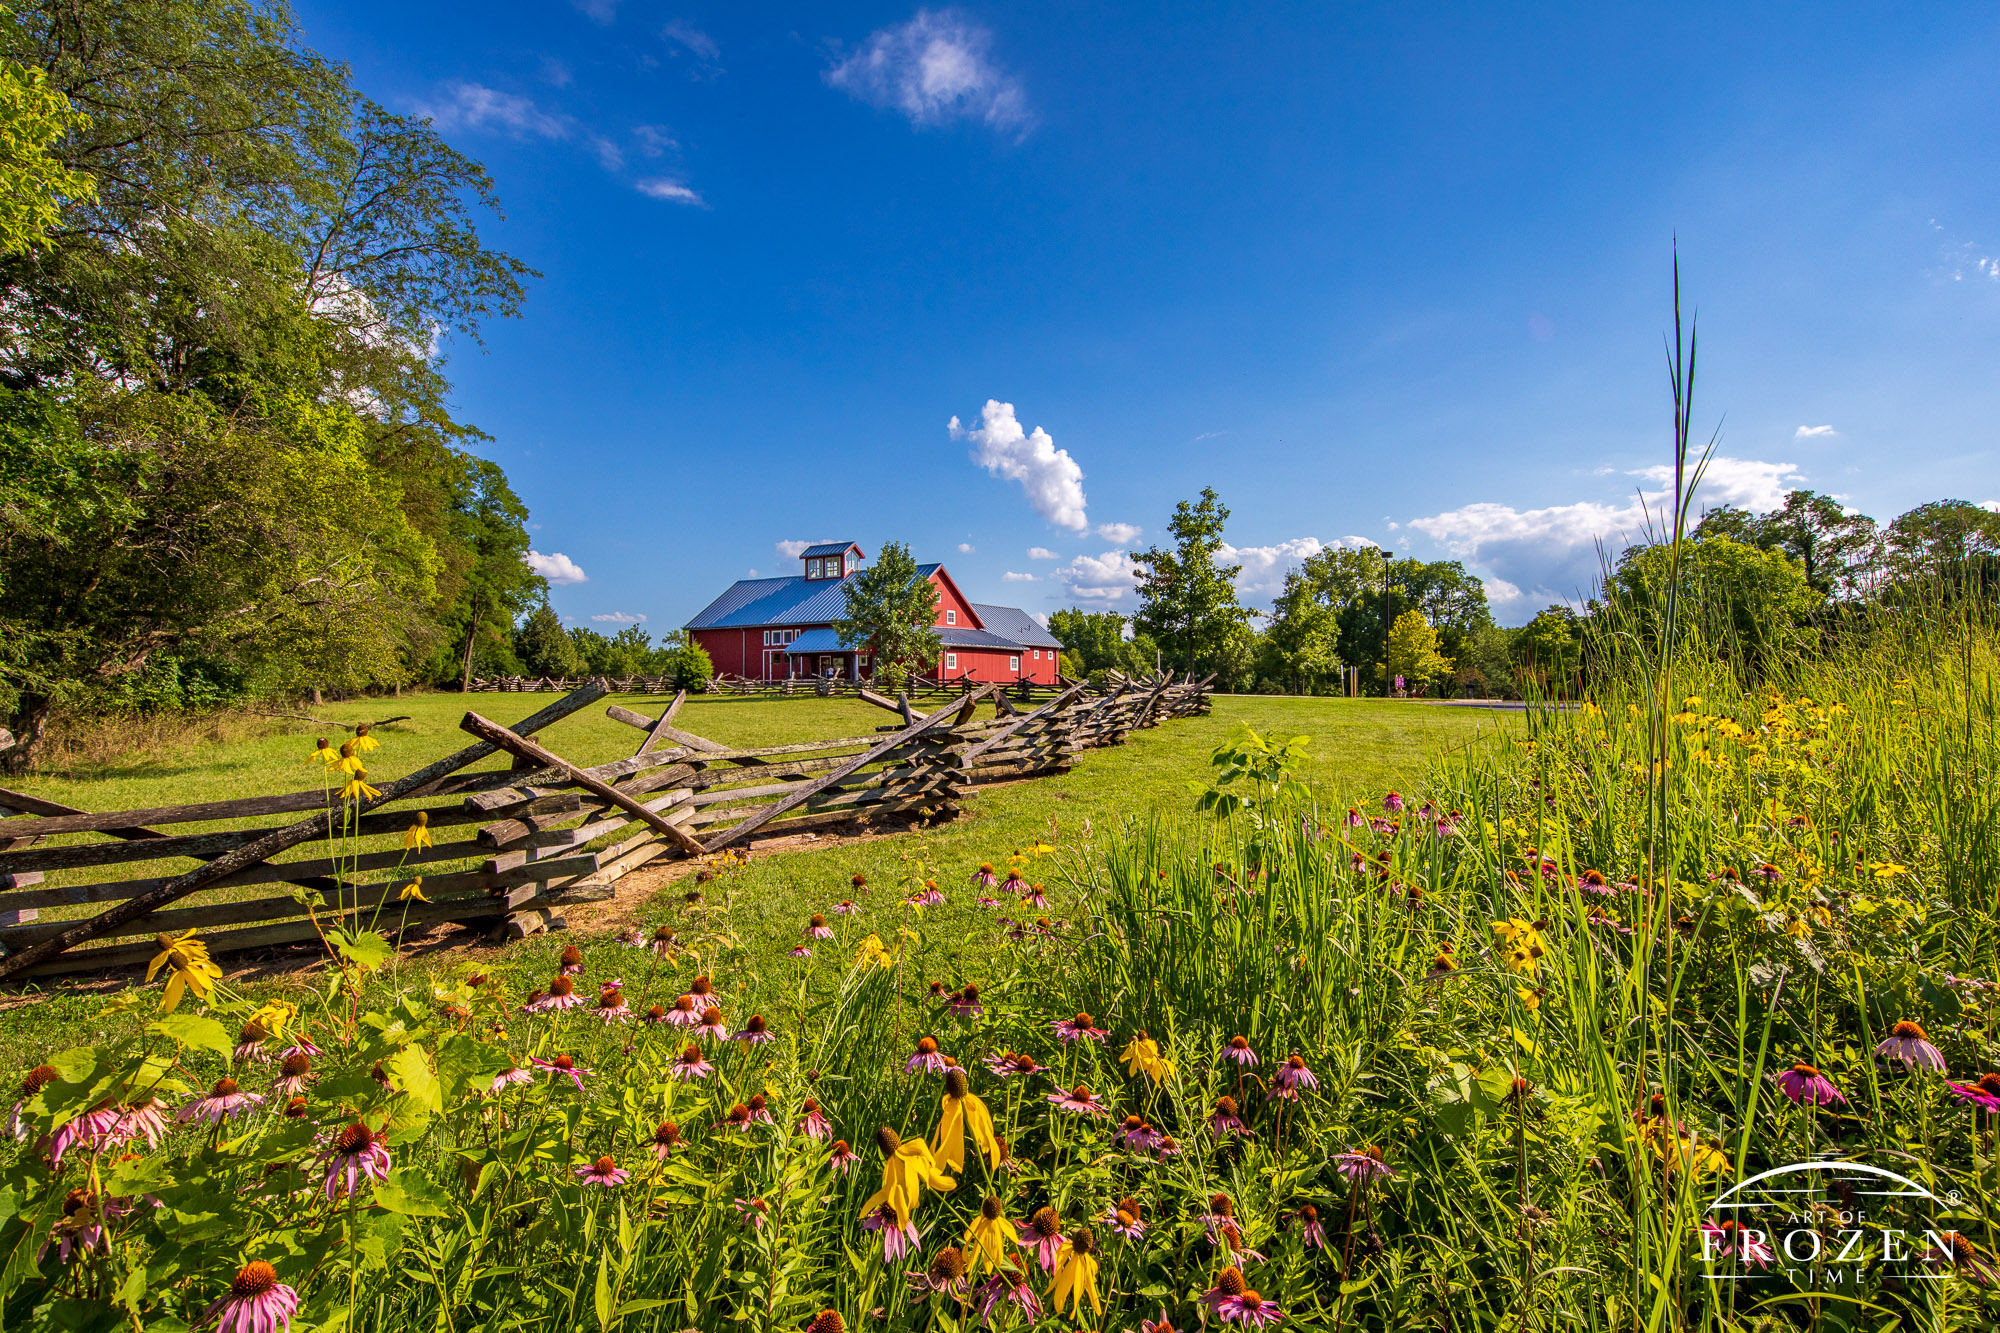 Ohio native wildflowers next to a stacked, split-rail fence leading to the bright red visitor center at Carriage Hill MetroPark